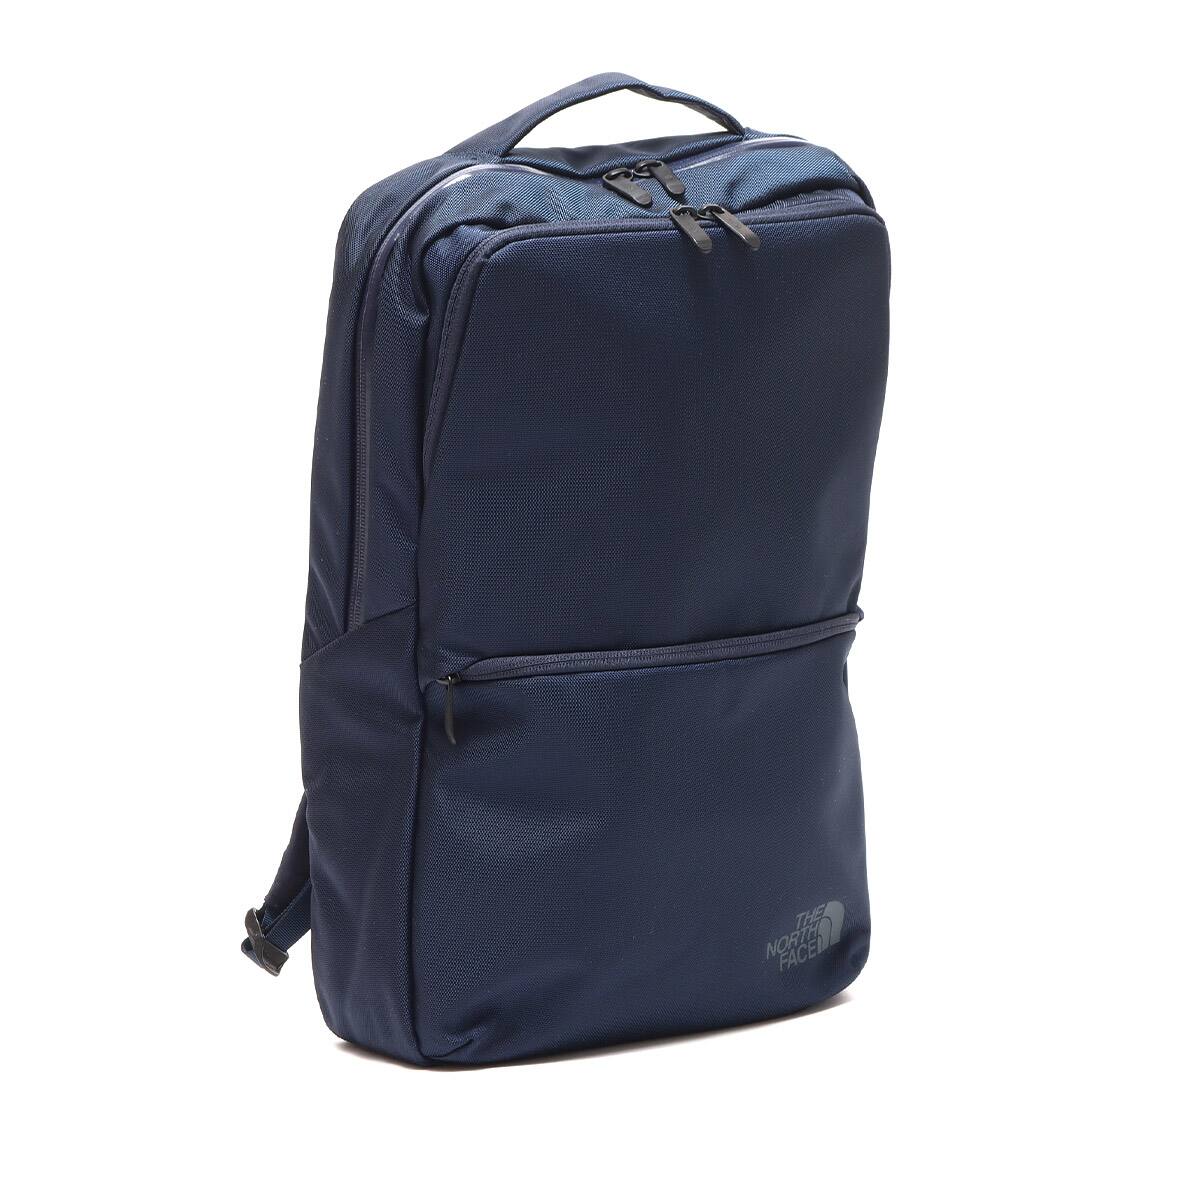 THE NORTH FACE SHUTTLE DAYPACK SLIM アーバンネイビー 23SS-I